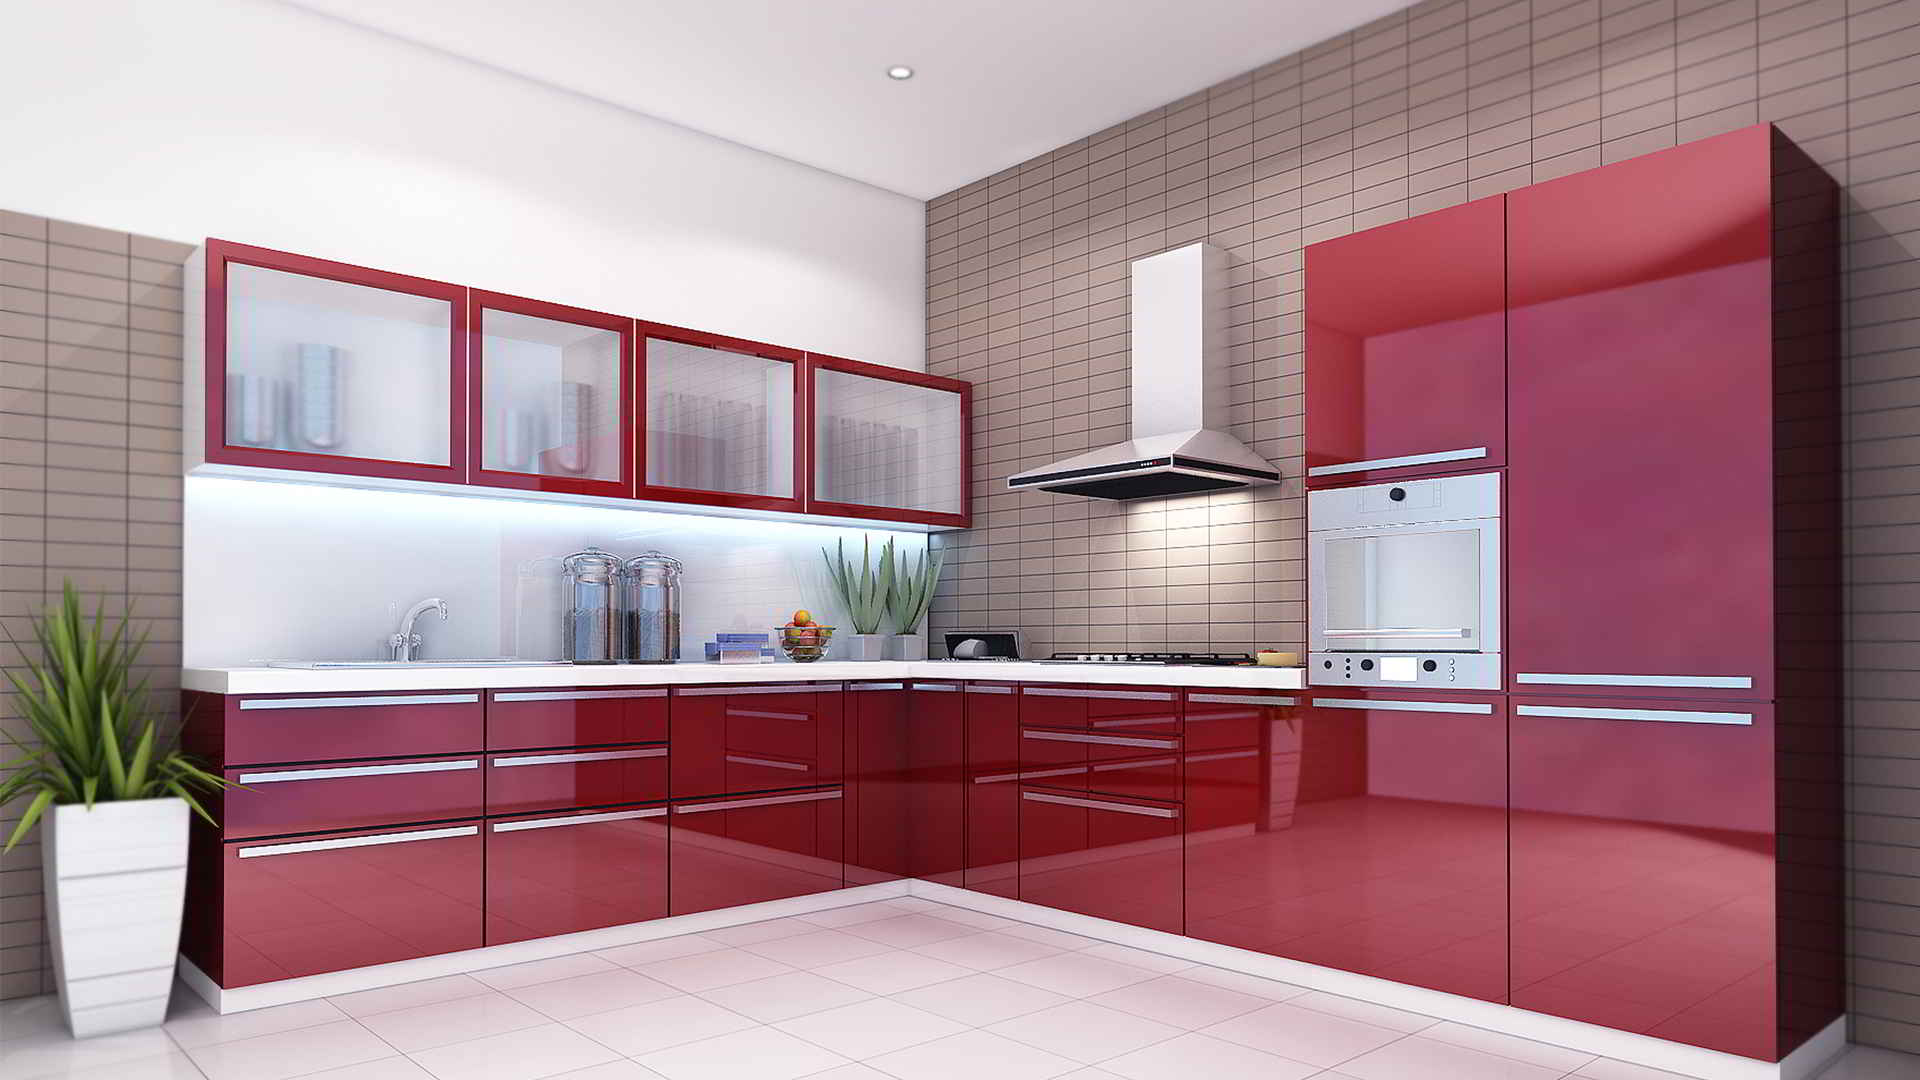 30 Awesome Modular Kitchen Designs - The WoW Style